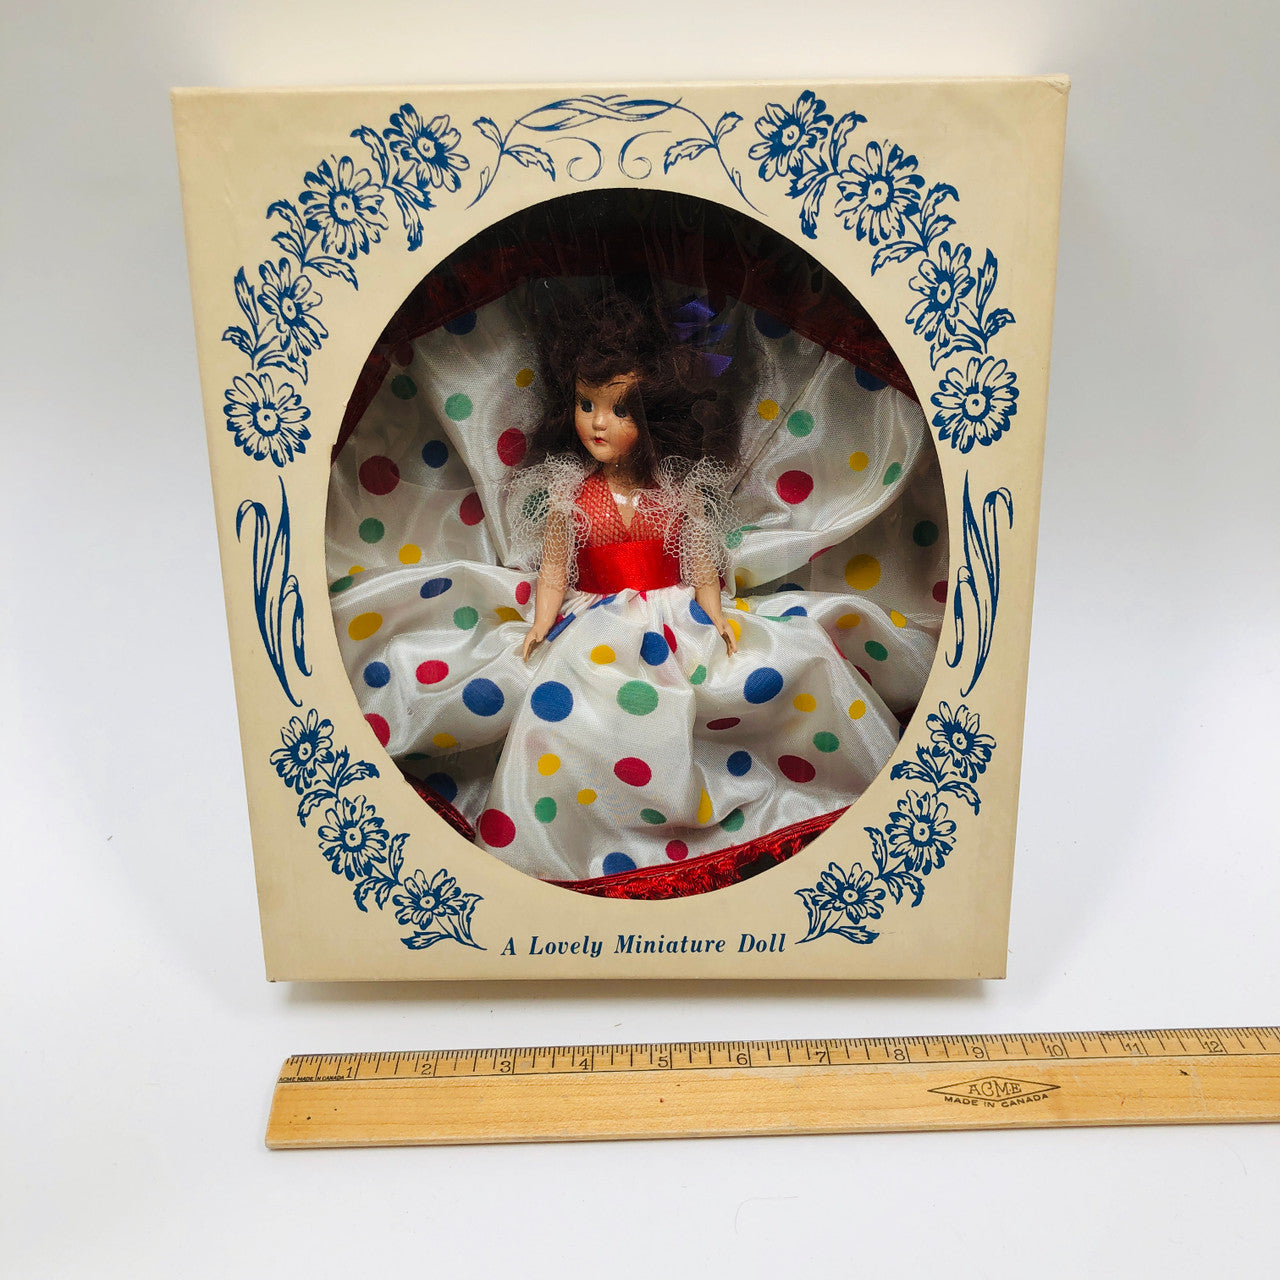 Miss Charm, A Lovely Miniature Doll, Vintage, Doll, Original, Box, Mid-century, Character Doll, Manufactured likely USA